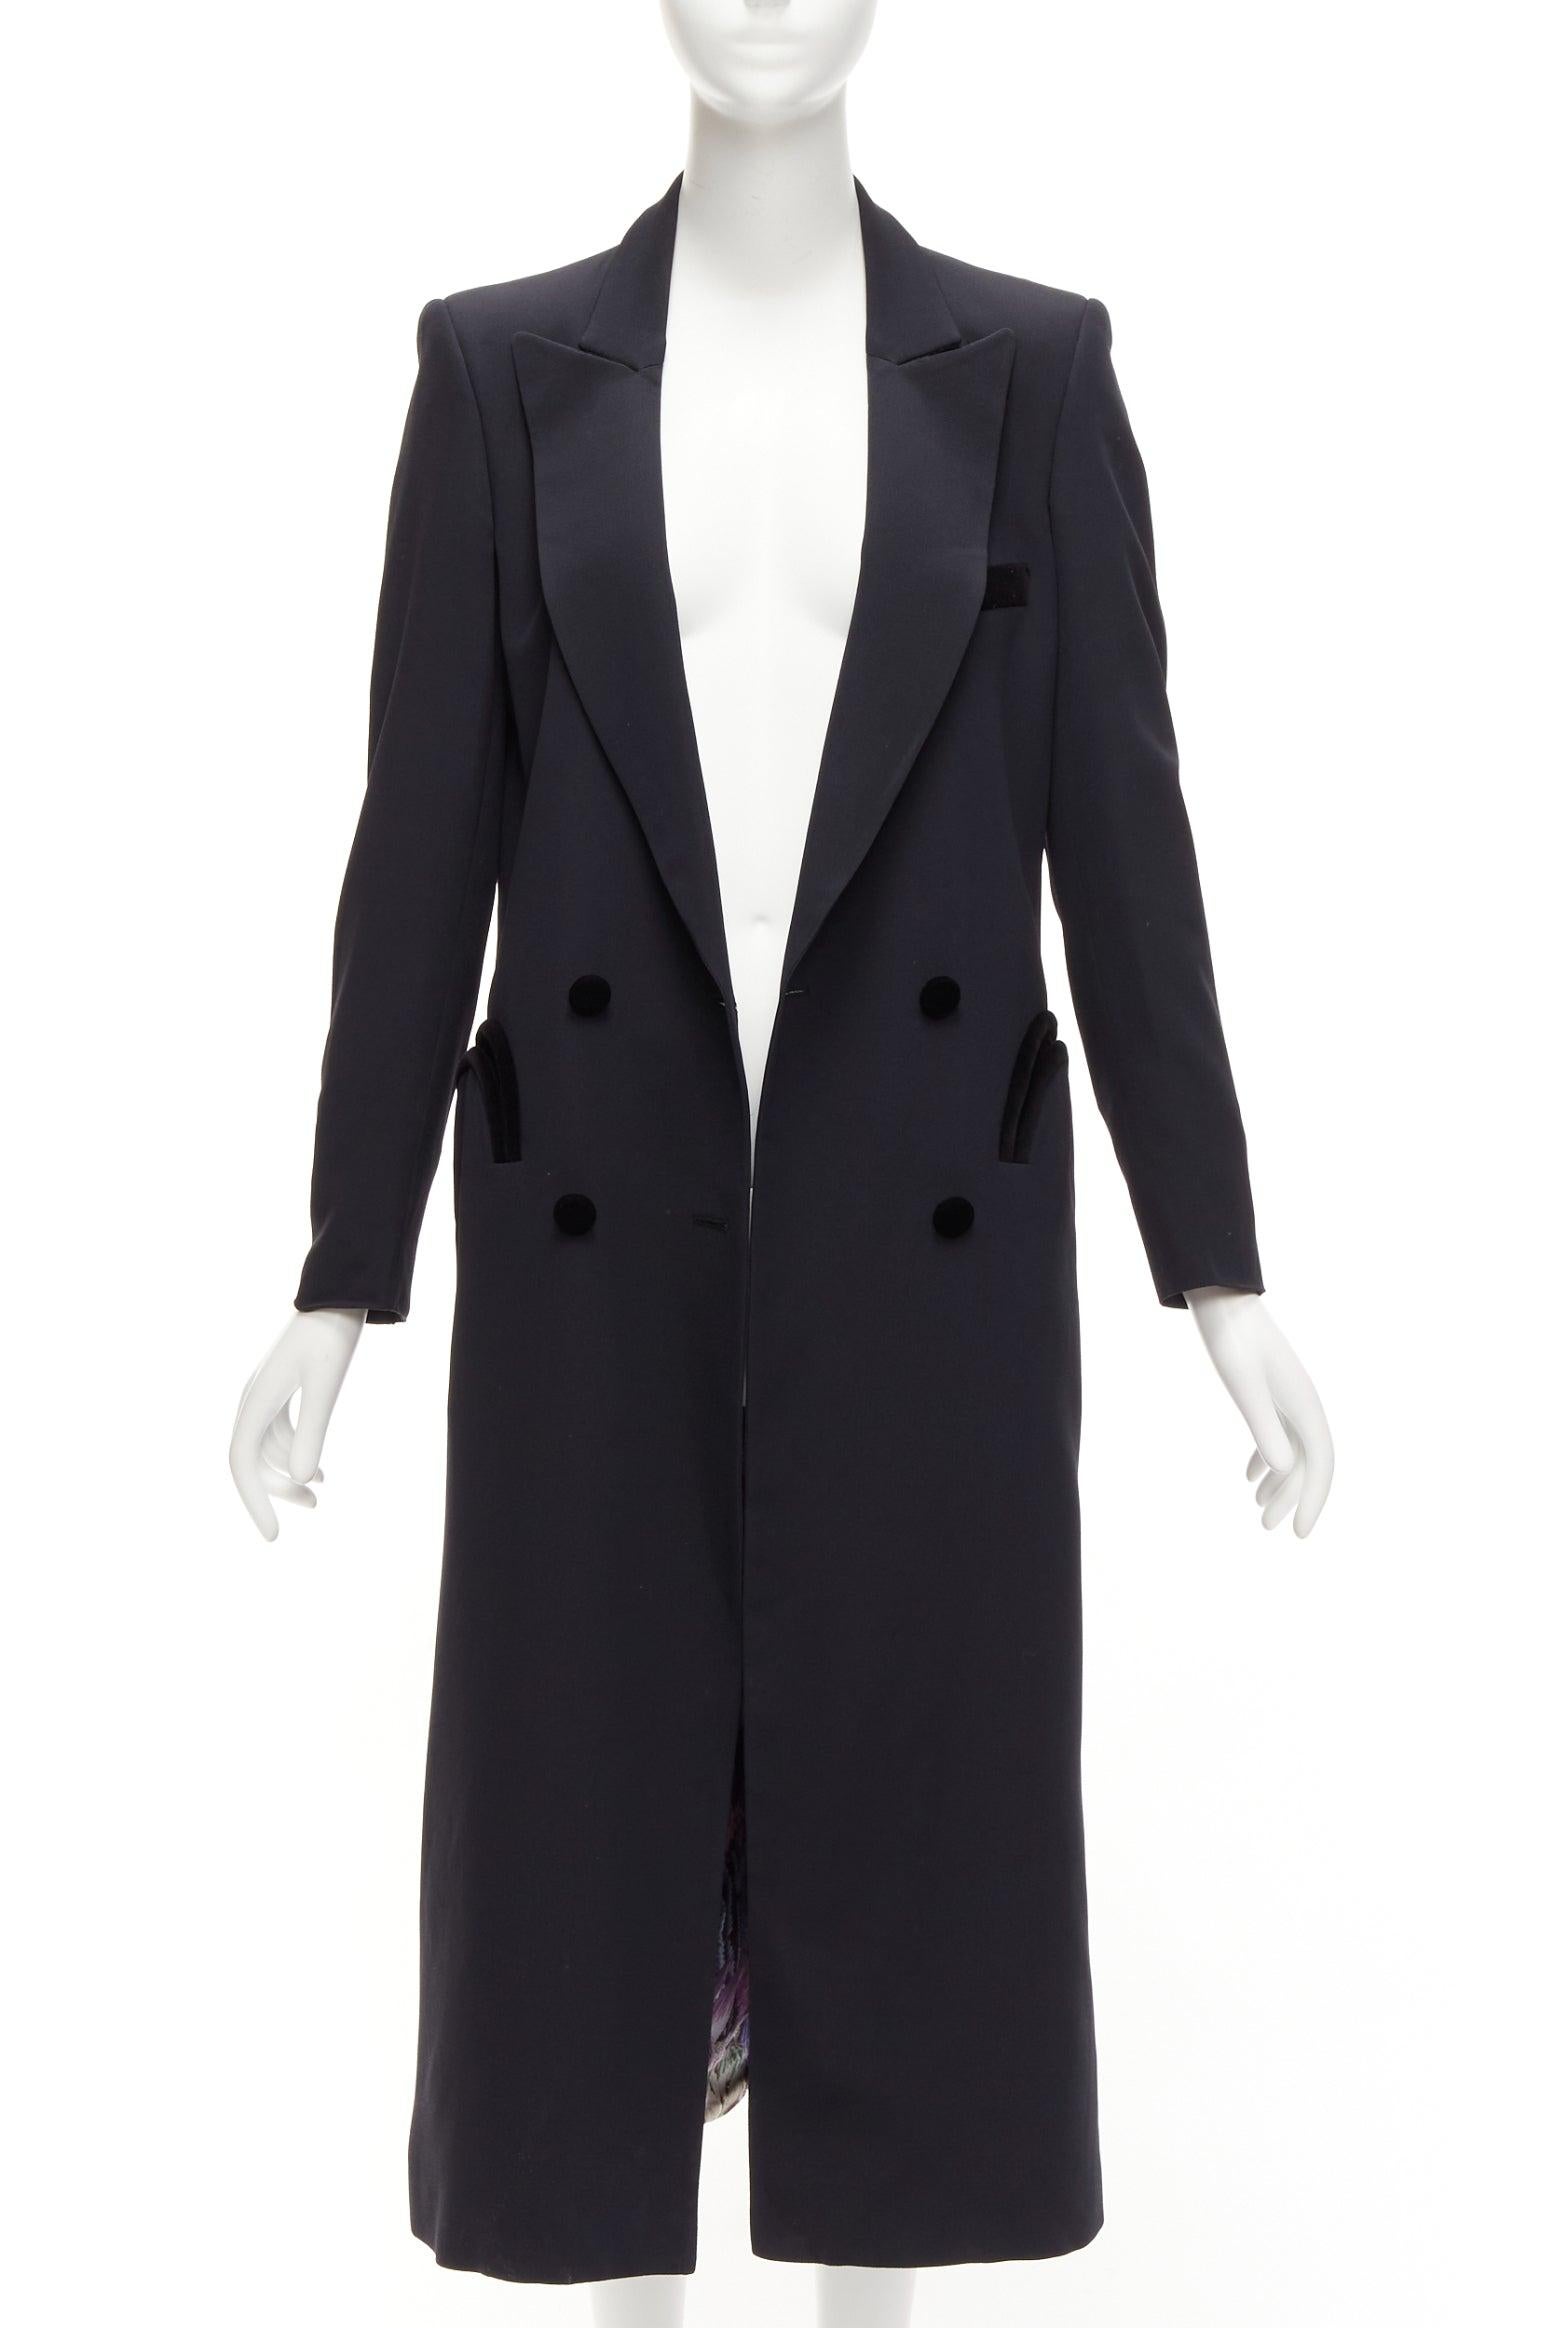 BLAZE MILANO Blazer Dress black curved pockets double breasted coat Sz.1 XS In Good Condition For Sale In Hong Kong, NT